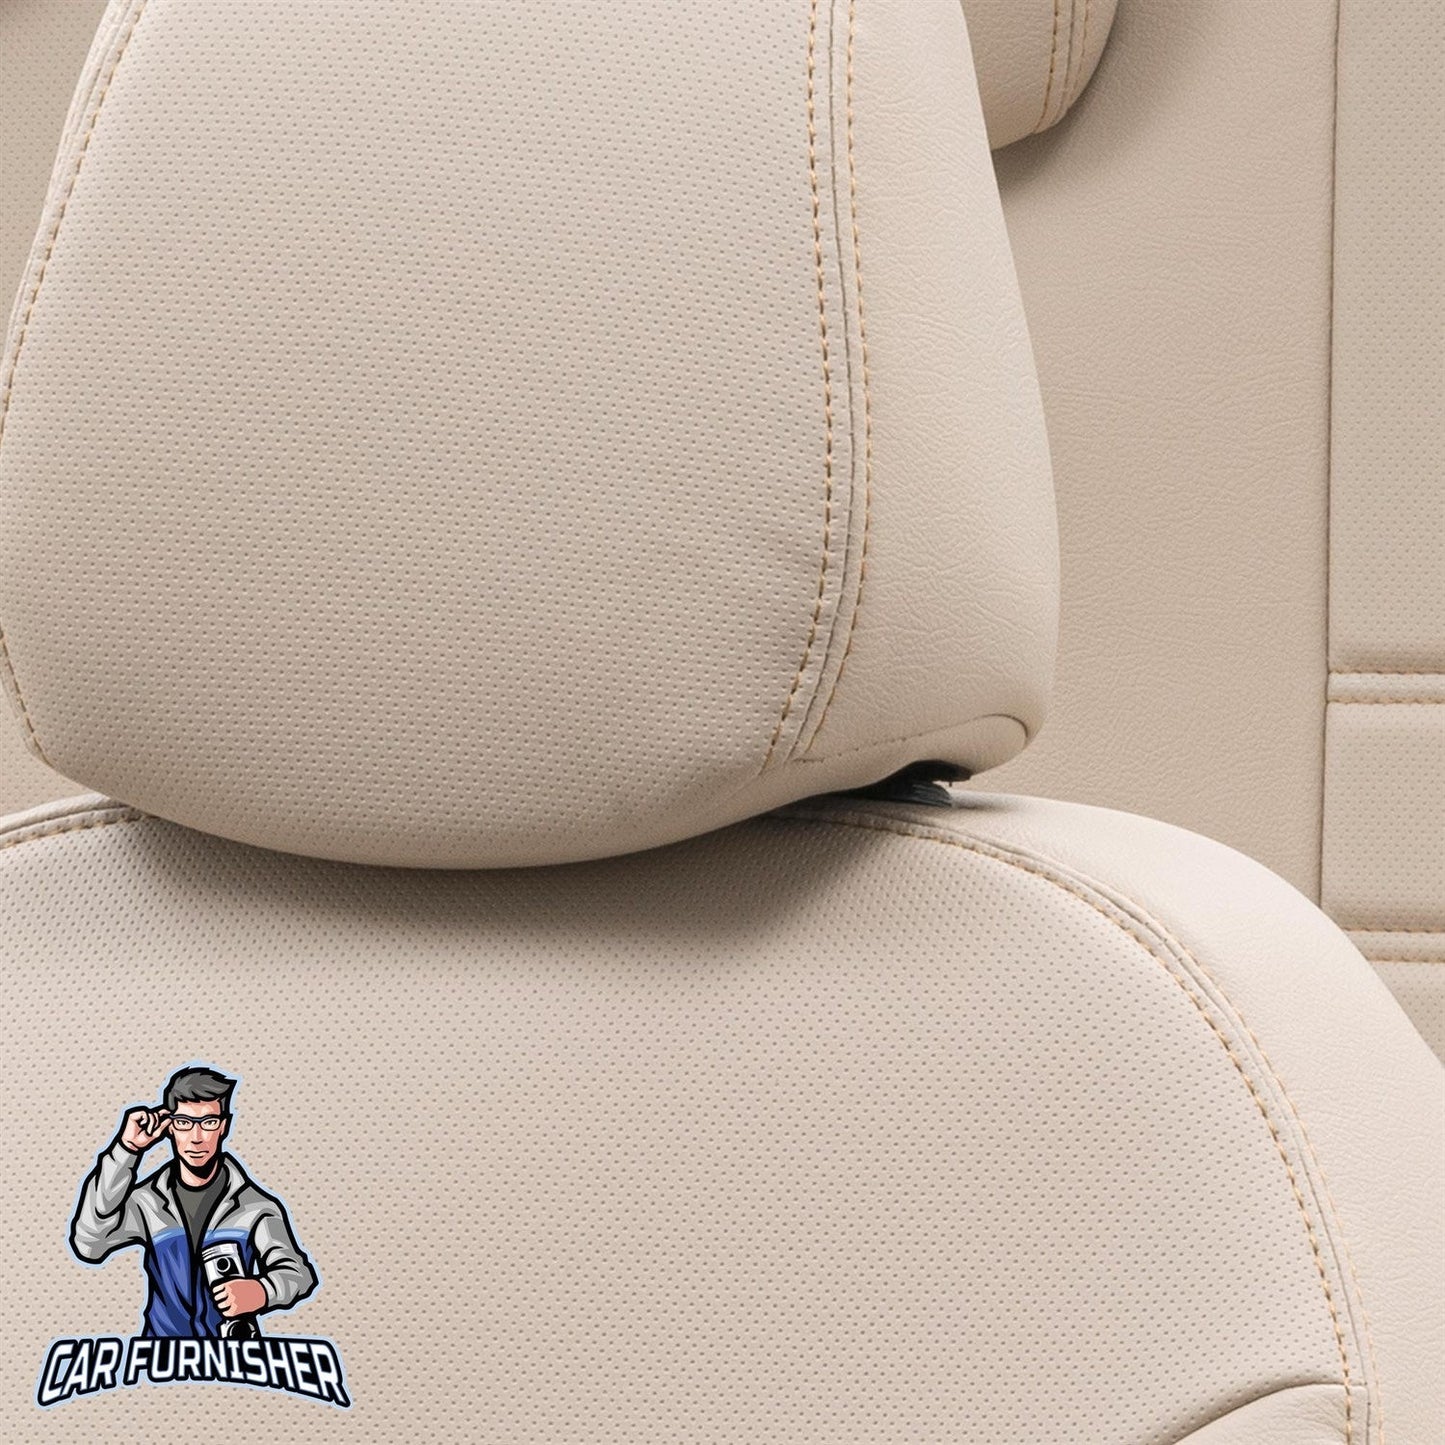 Hyundai Bayon Seat Covers Istanbul Leather Design Beige Leather